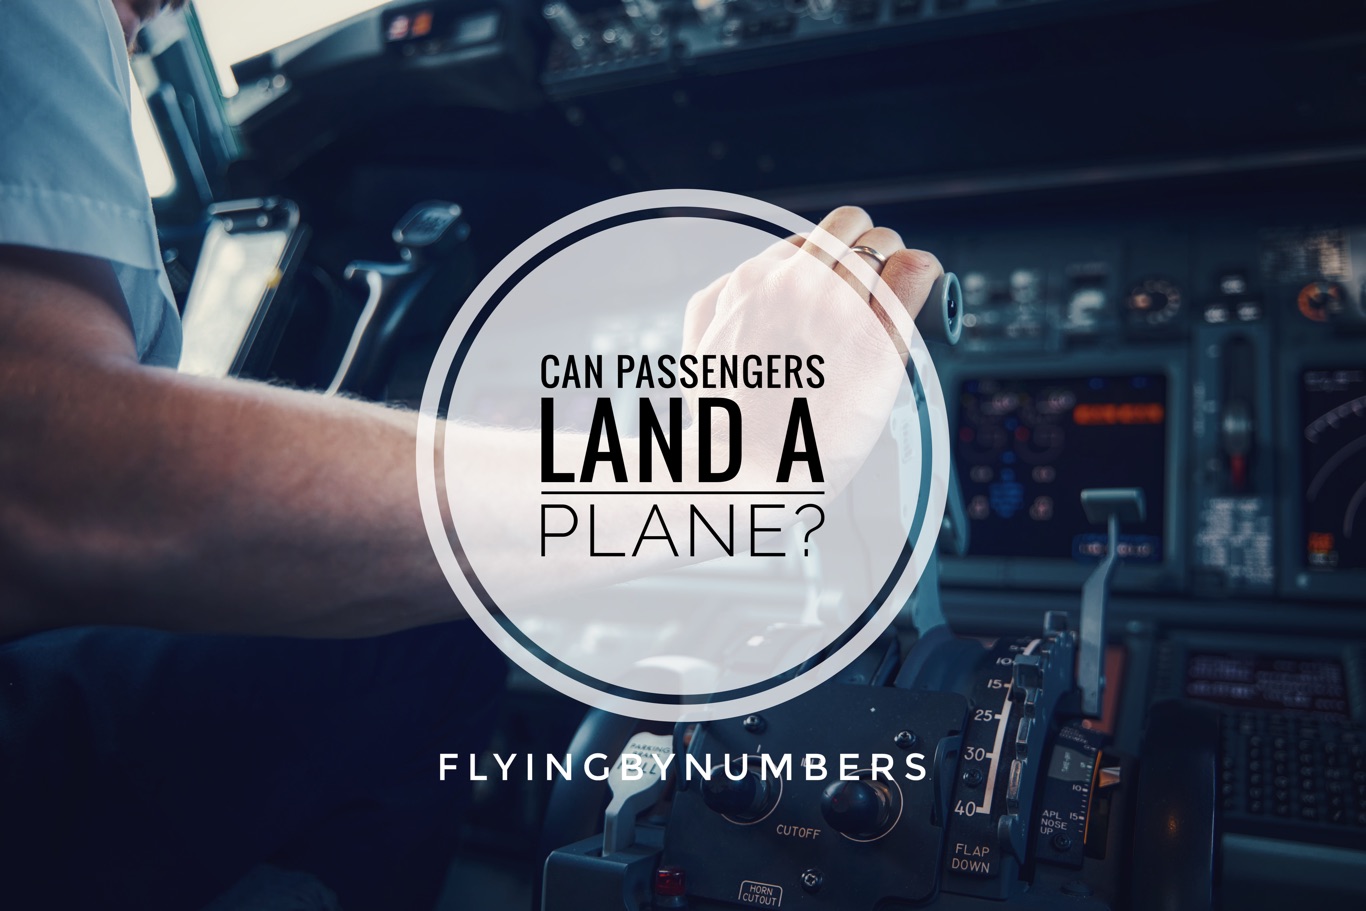 Would a passenger be able to land a commercial plane in an emergency?